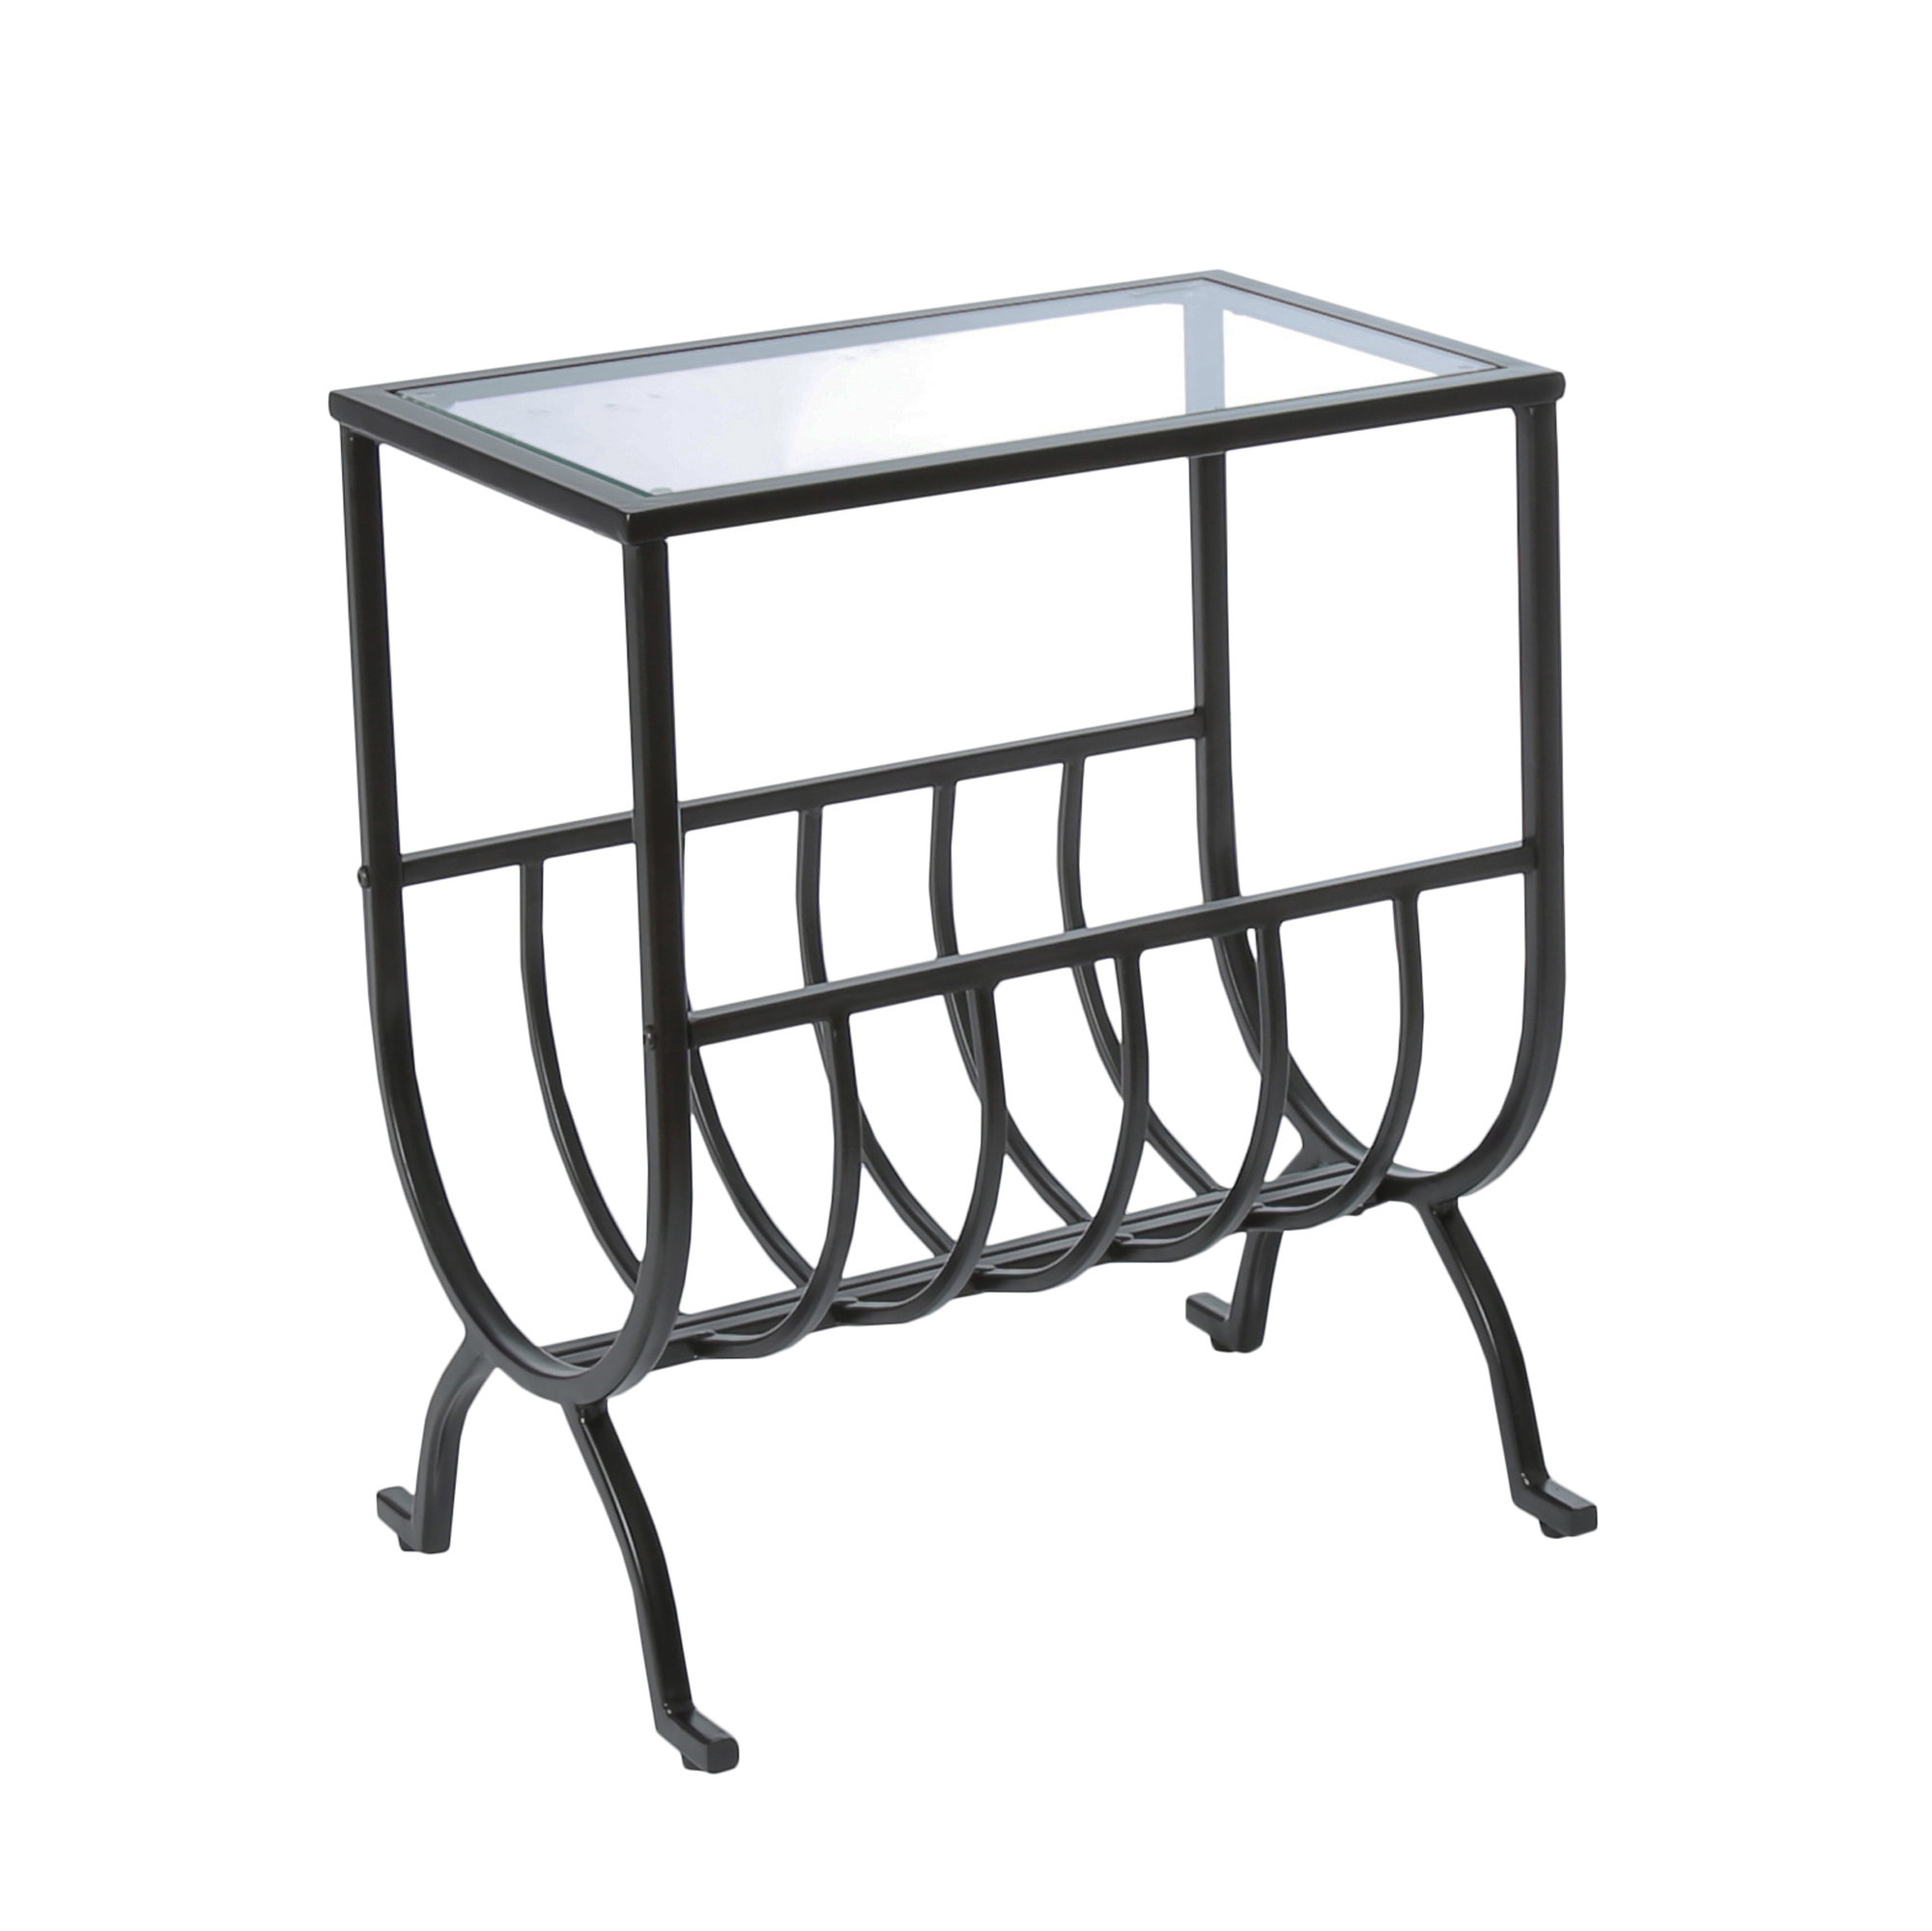 ACCENT TABLE - STARDUST BROWN METAL WITH TEMPERED GLASS